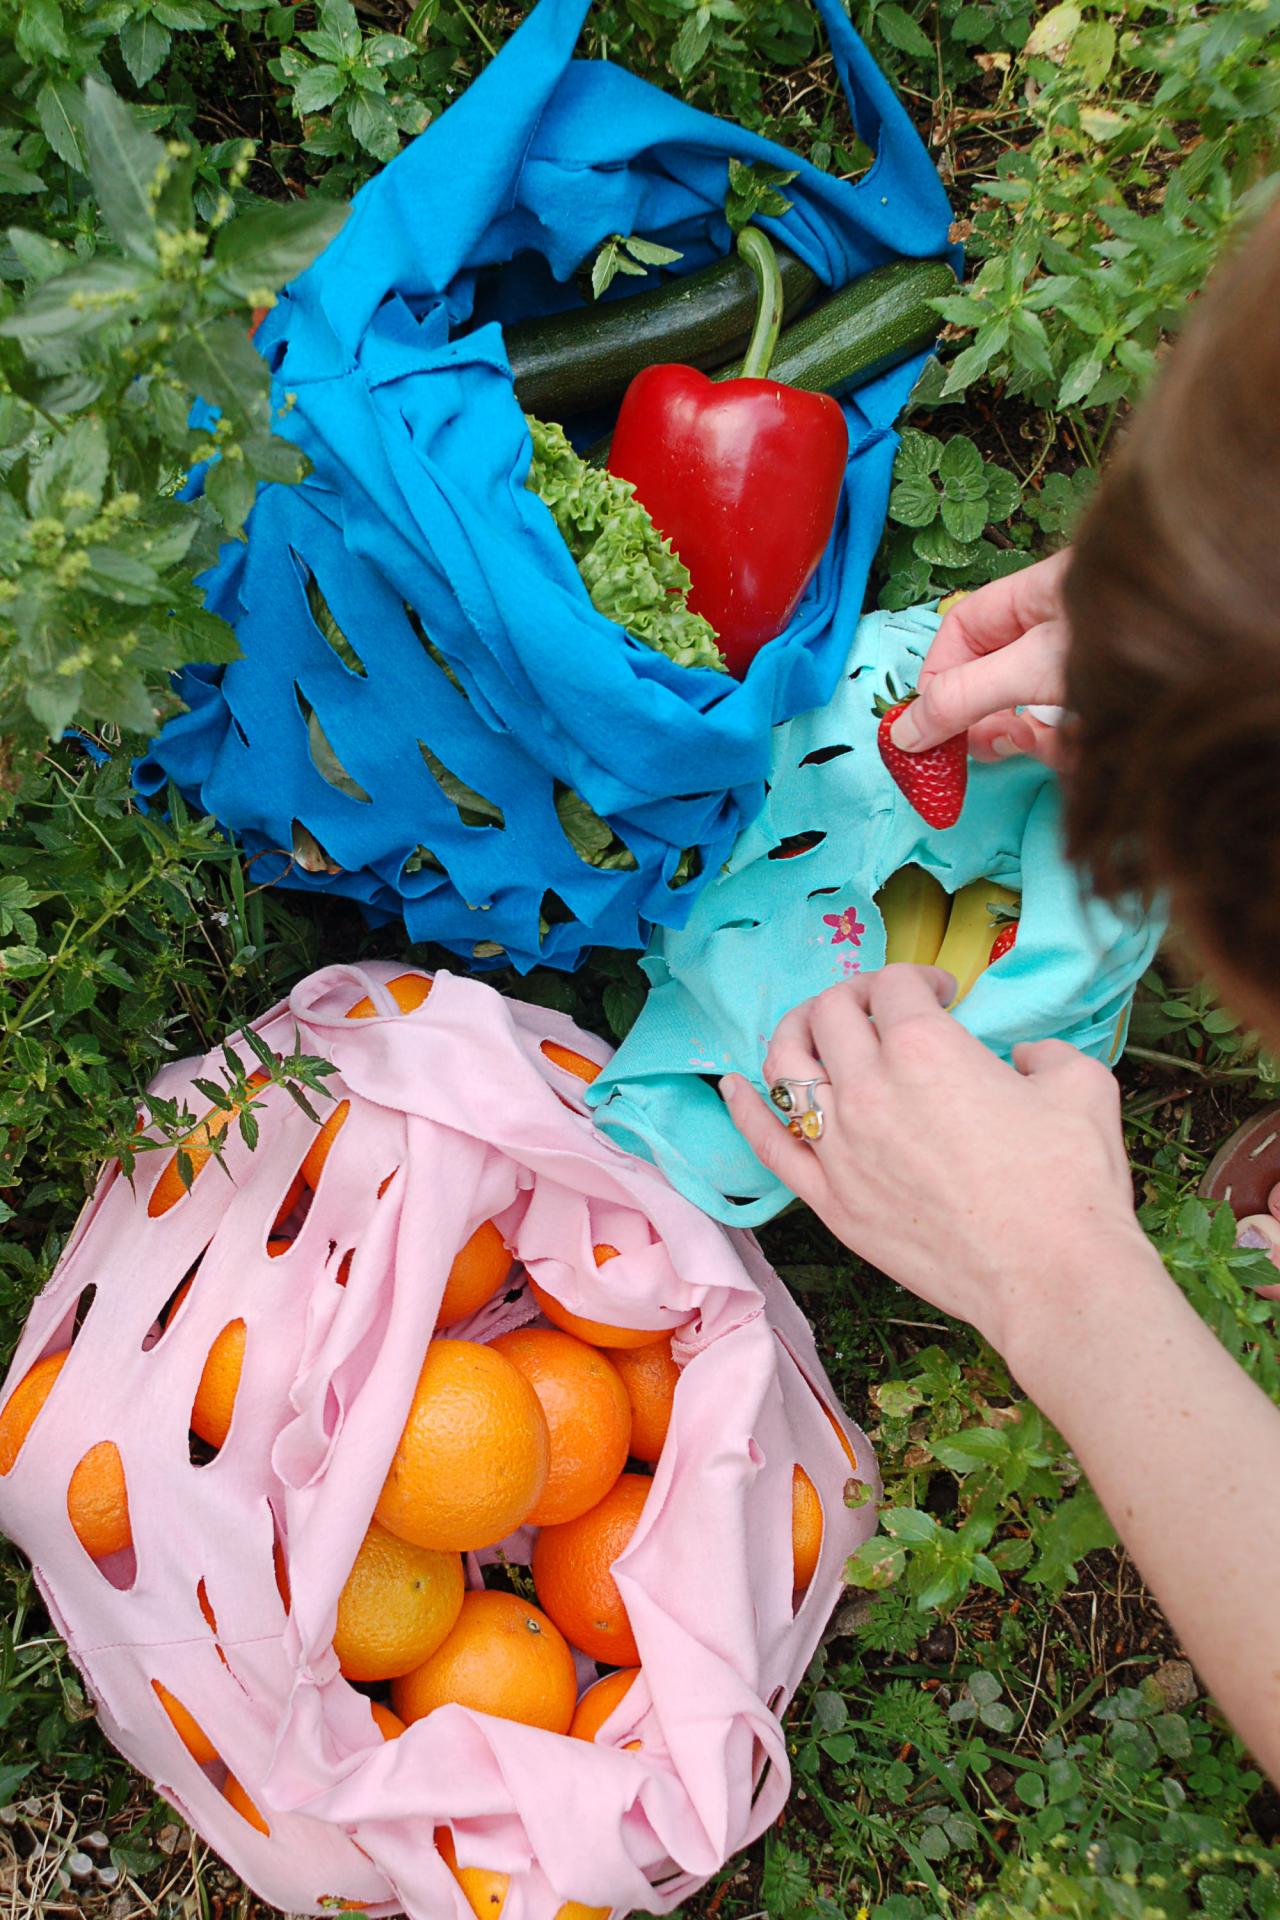 DIY Basket Bag from Plastic  Upcycling Crafts for Eco-Friendly